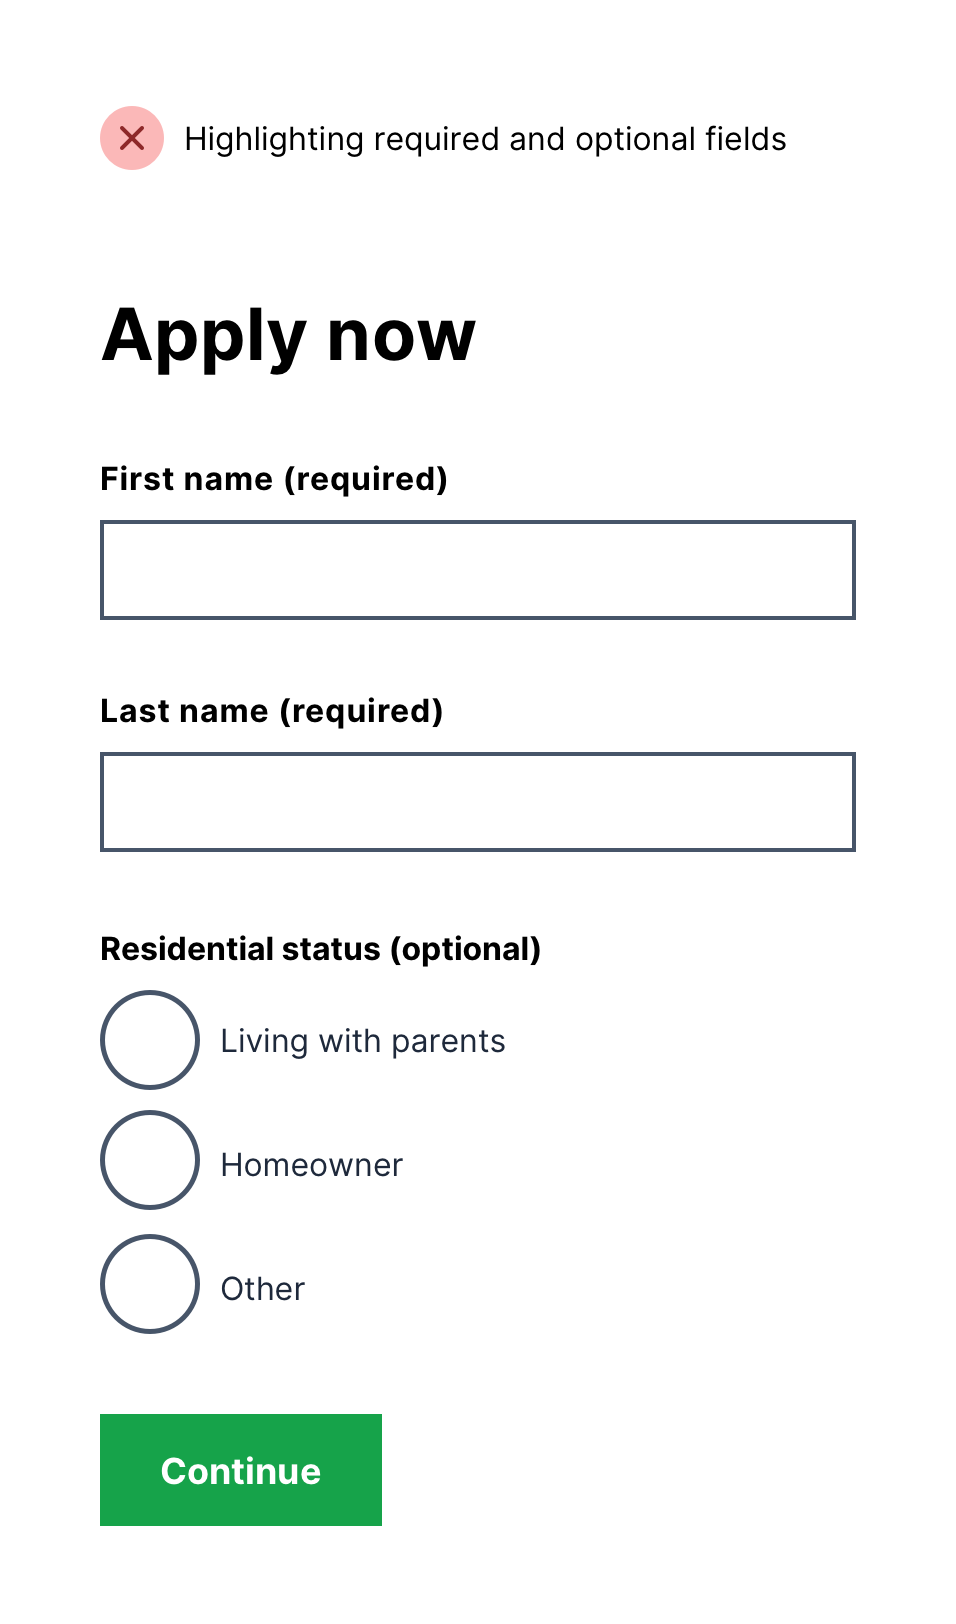 Form with higlighted required and optional fields